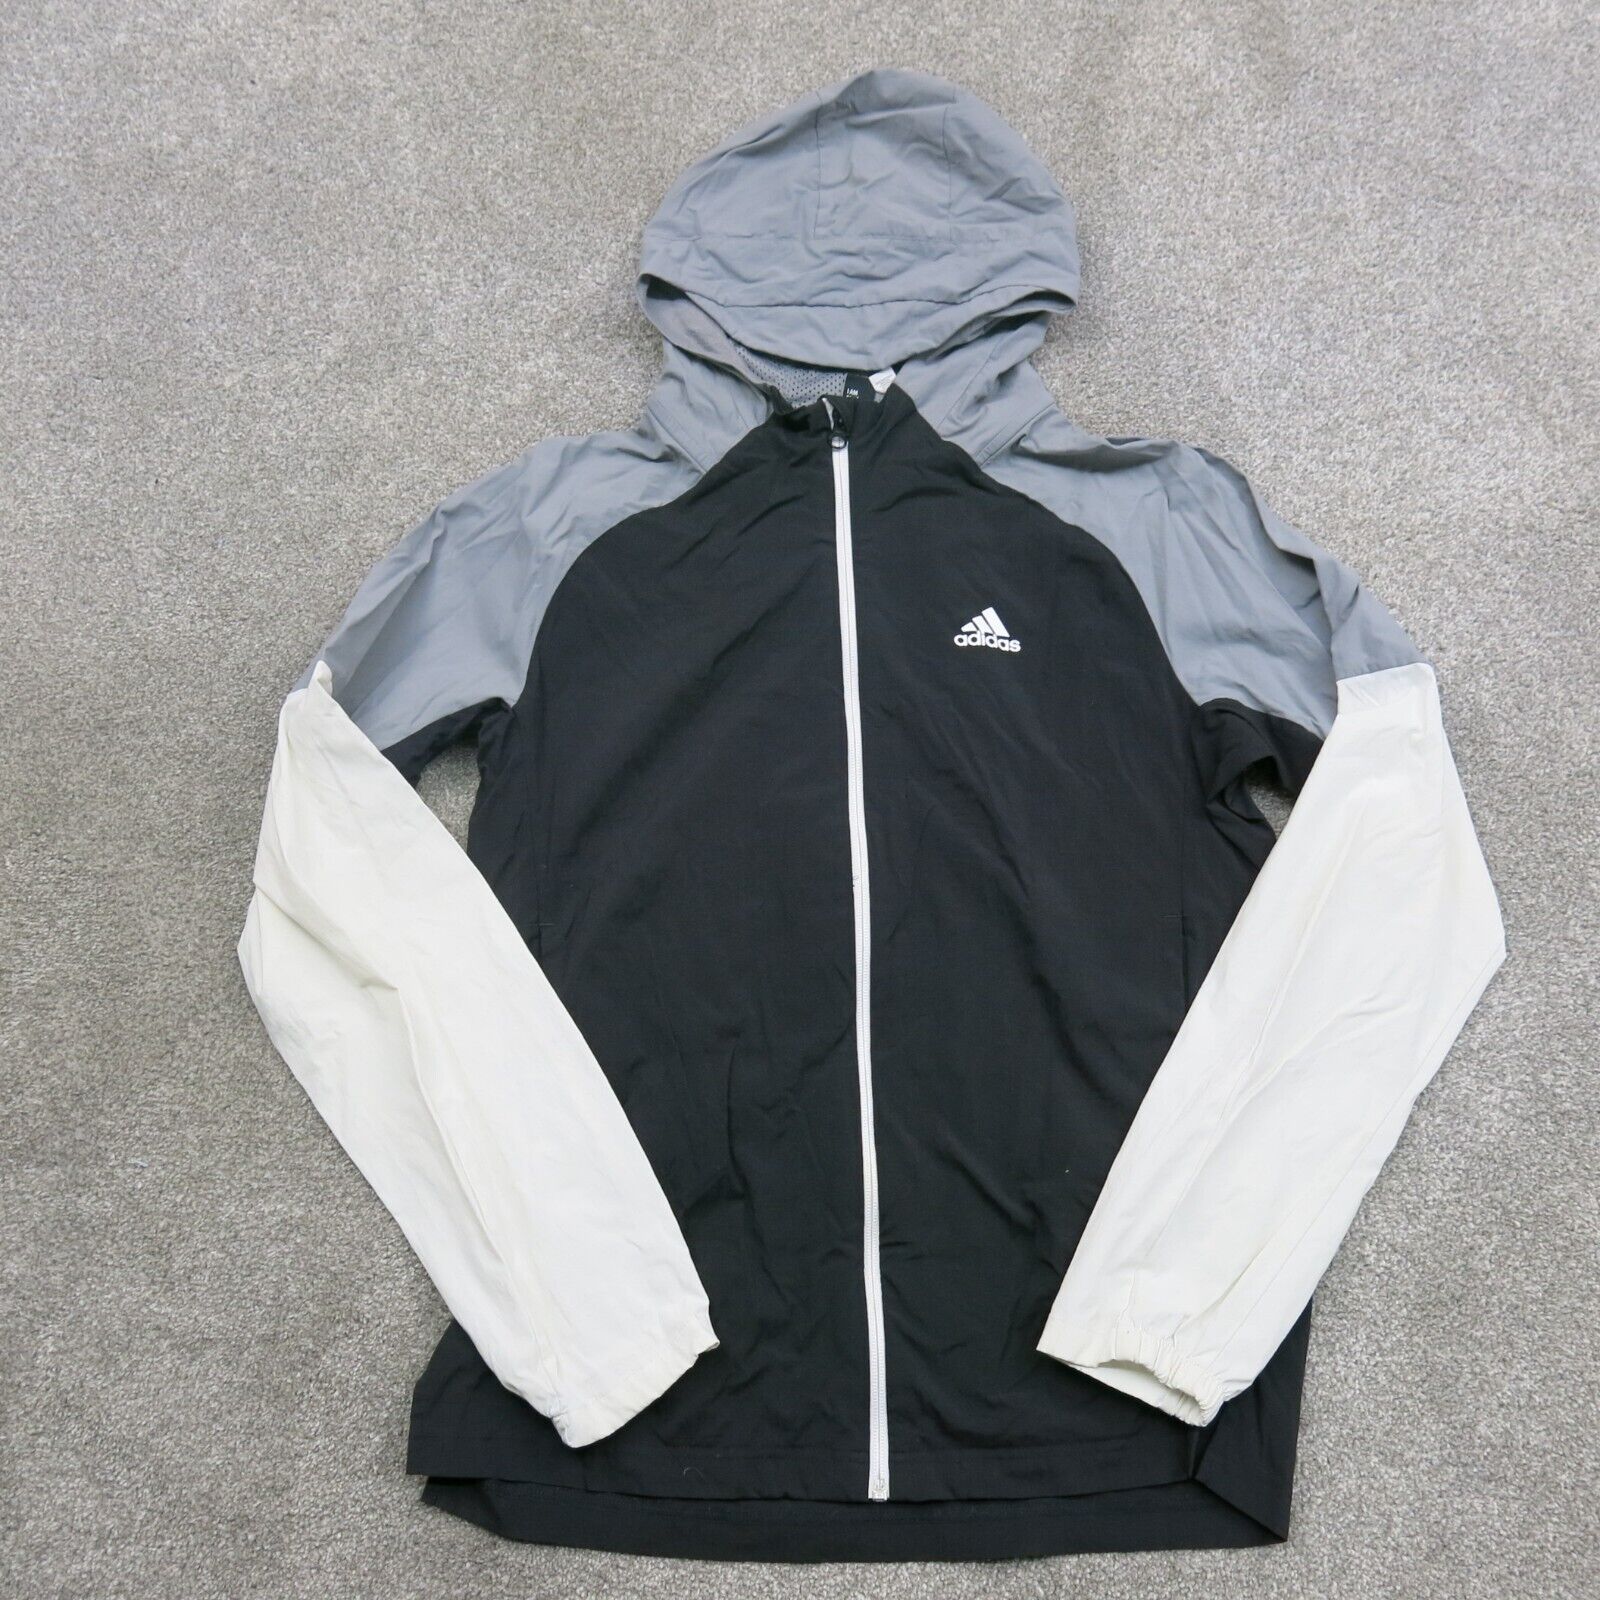 Cotton Adidas Men Jacket, Size : L, XL XXL at Rs 1,800 / Piece in Mumbai |  Trade Movers